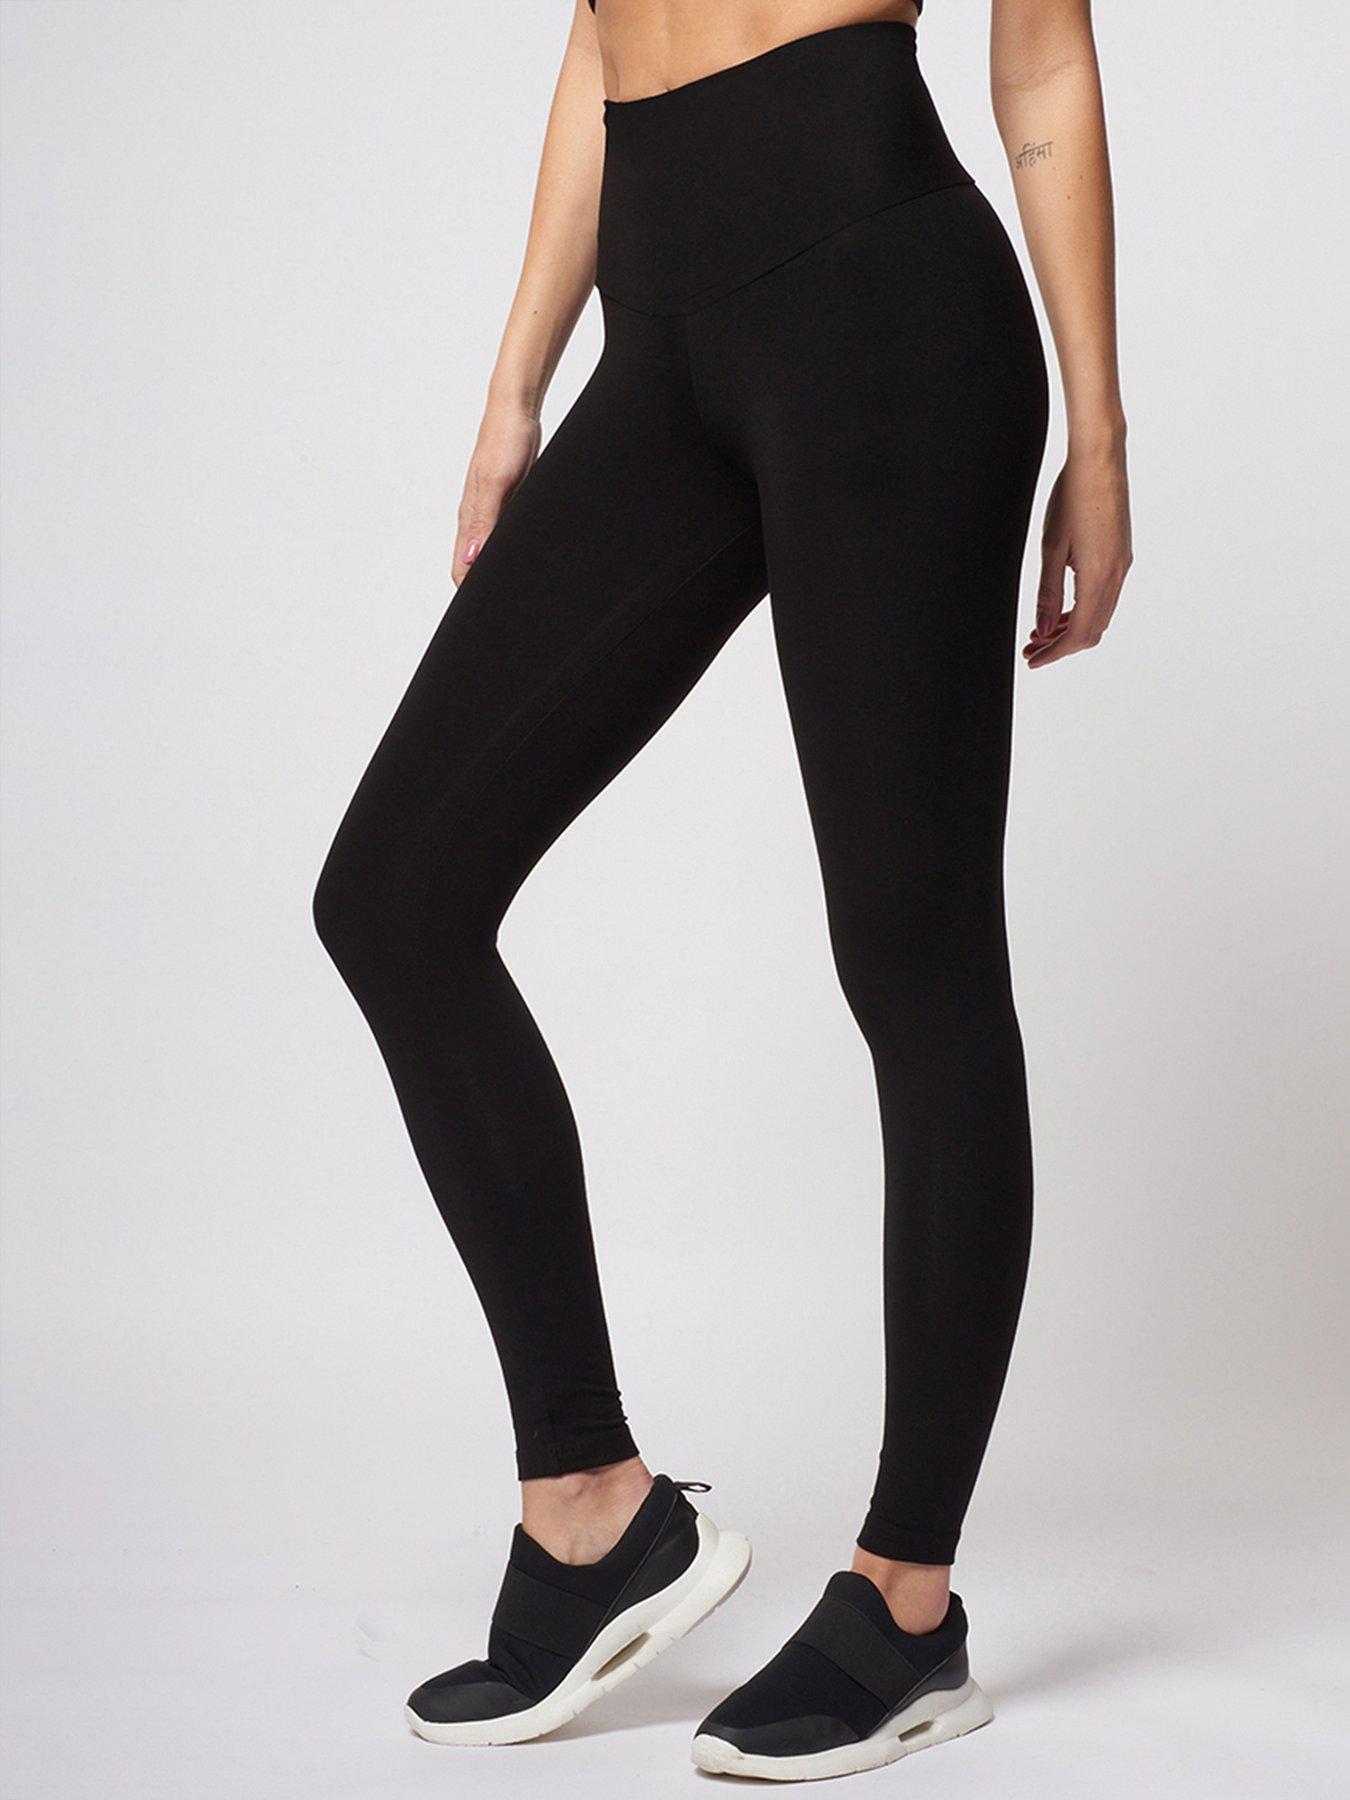 Buy TLC Sport, Super High Waisted Leggings for Women with Tummy Control, Extra  Strong Compression, Buttery Soft Fabric